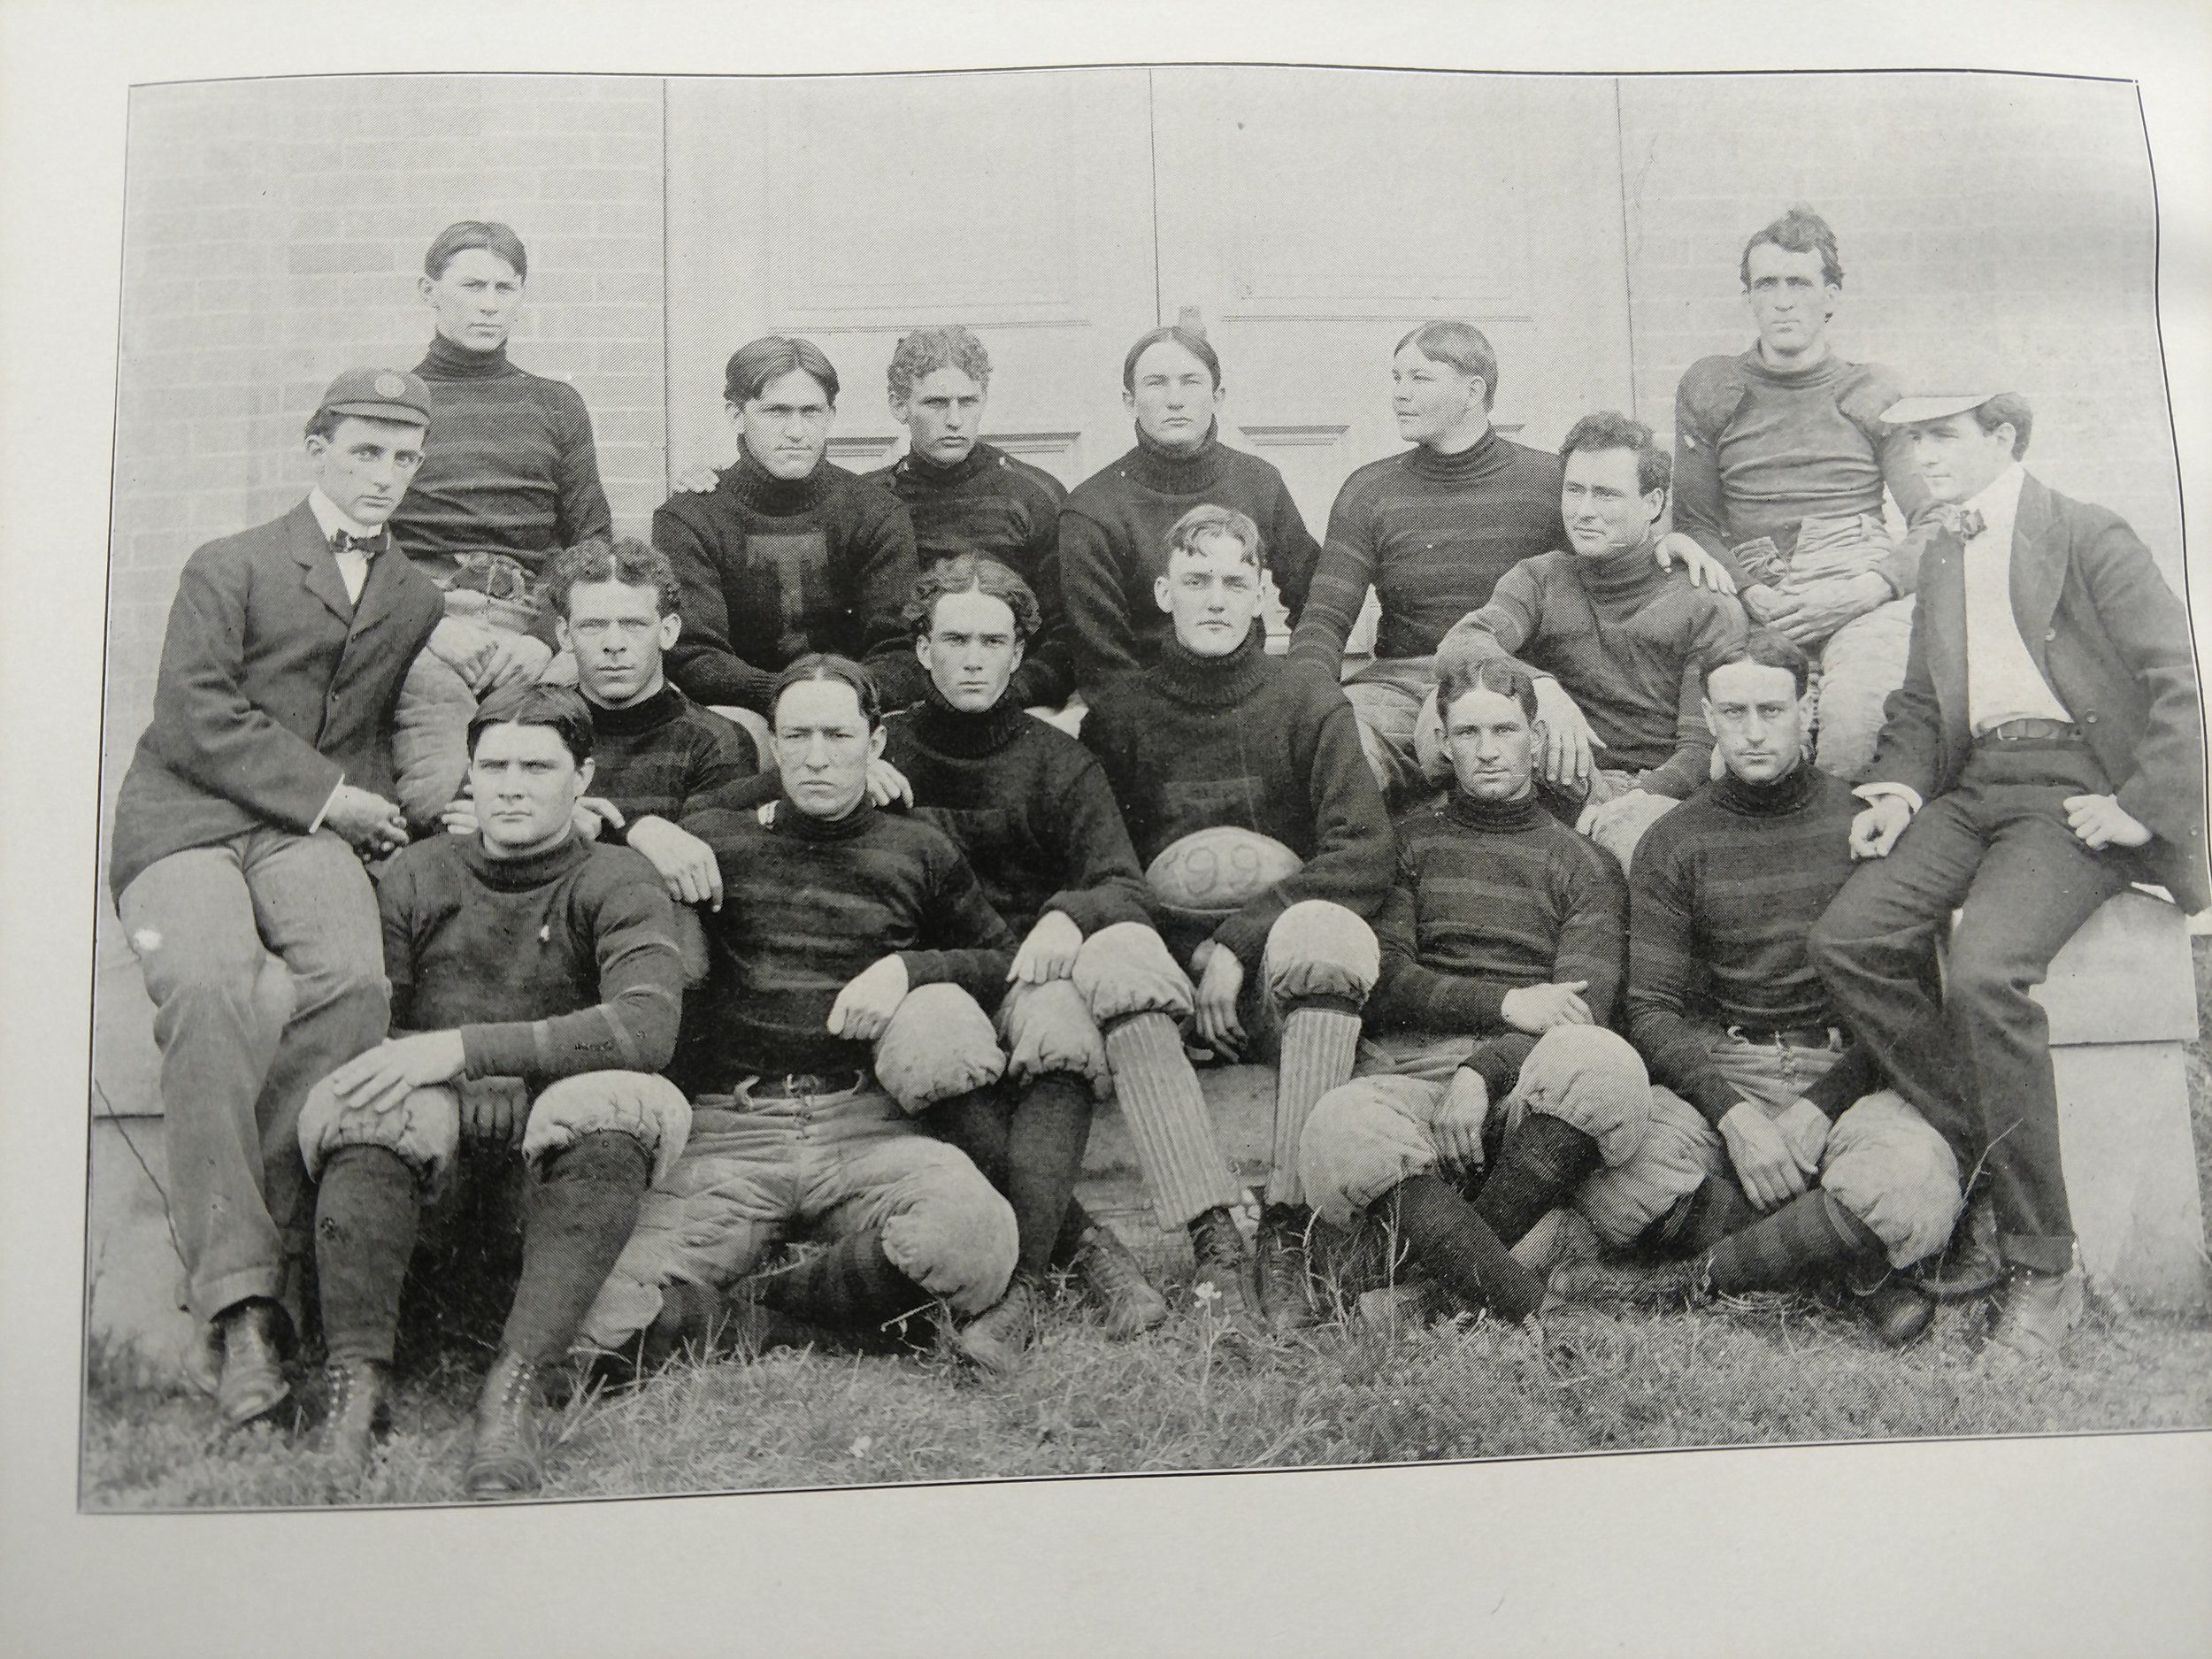 1899 Stewart's grandfather played on the 1899 team